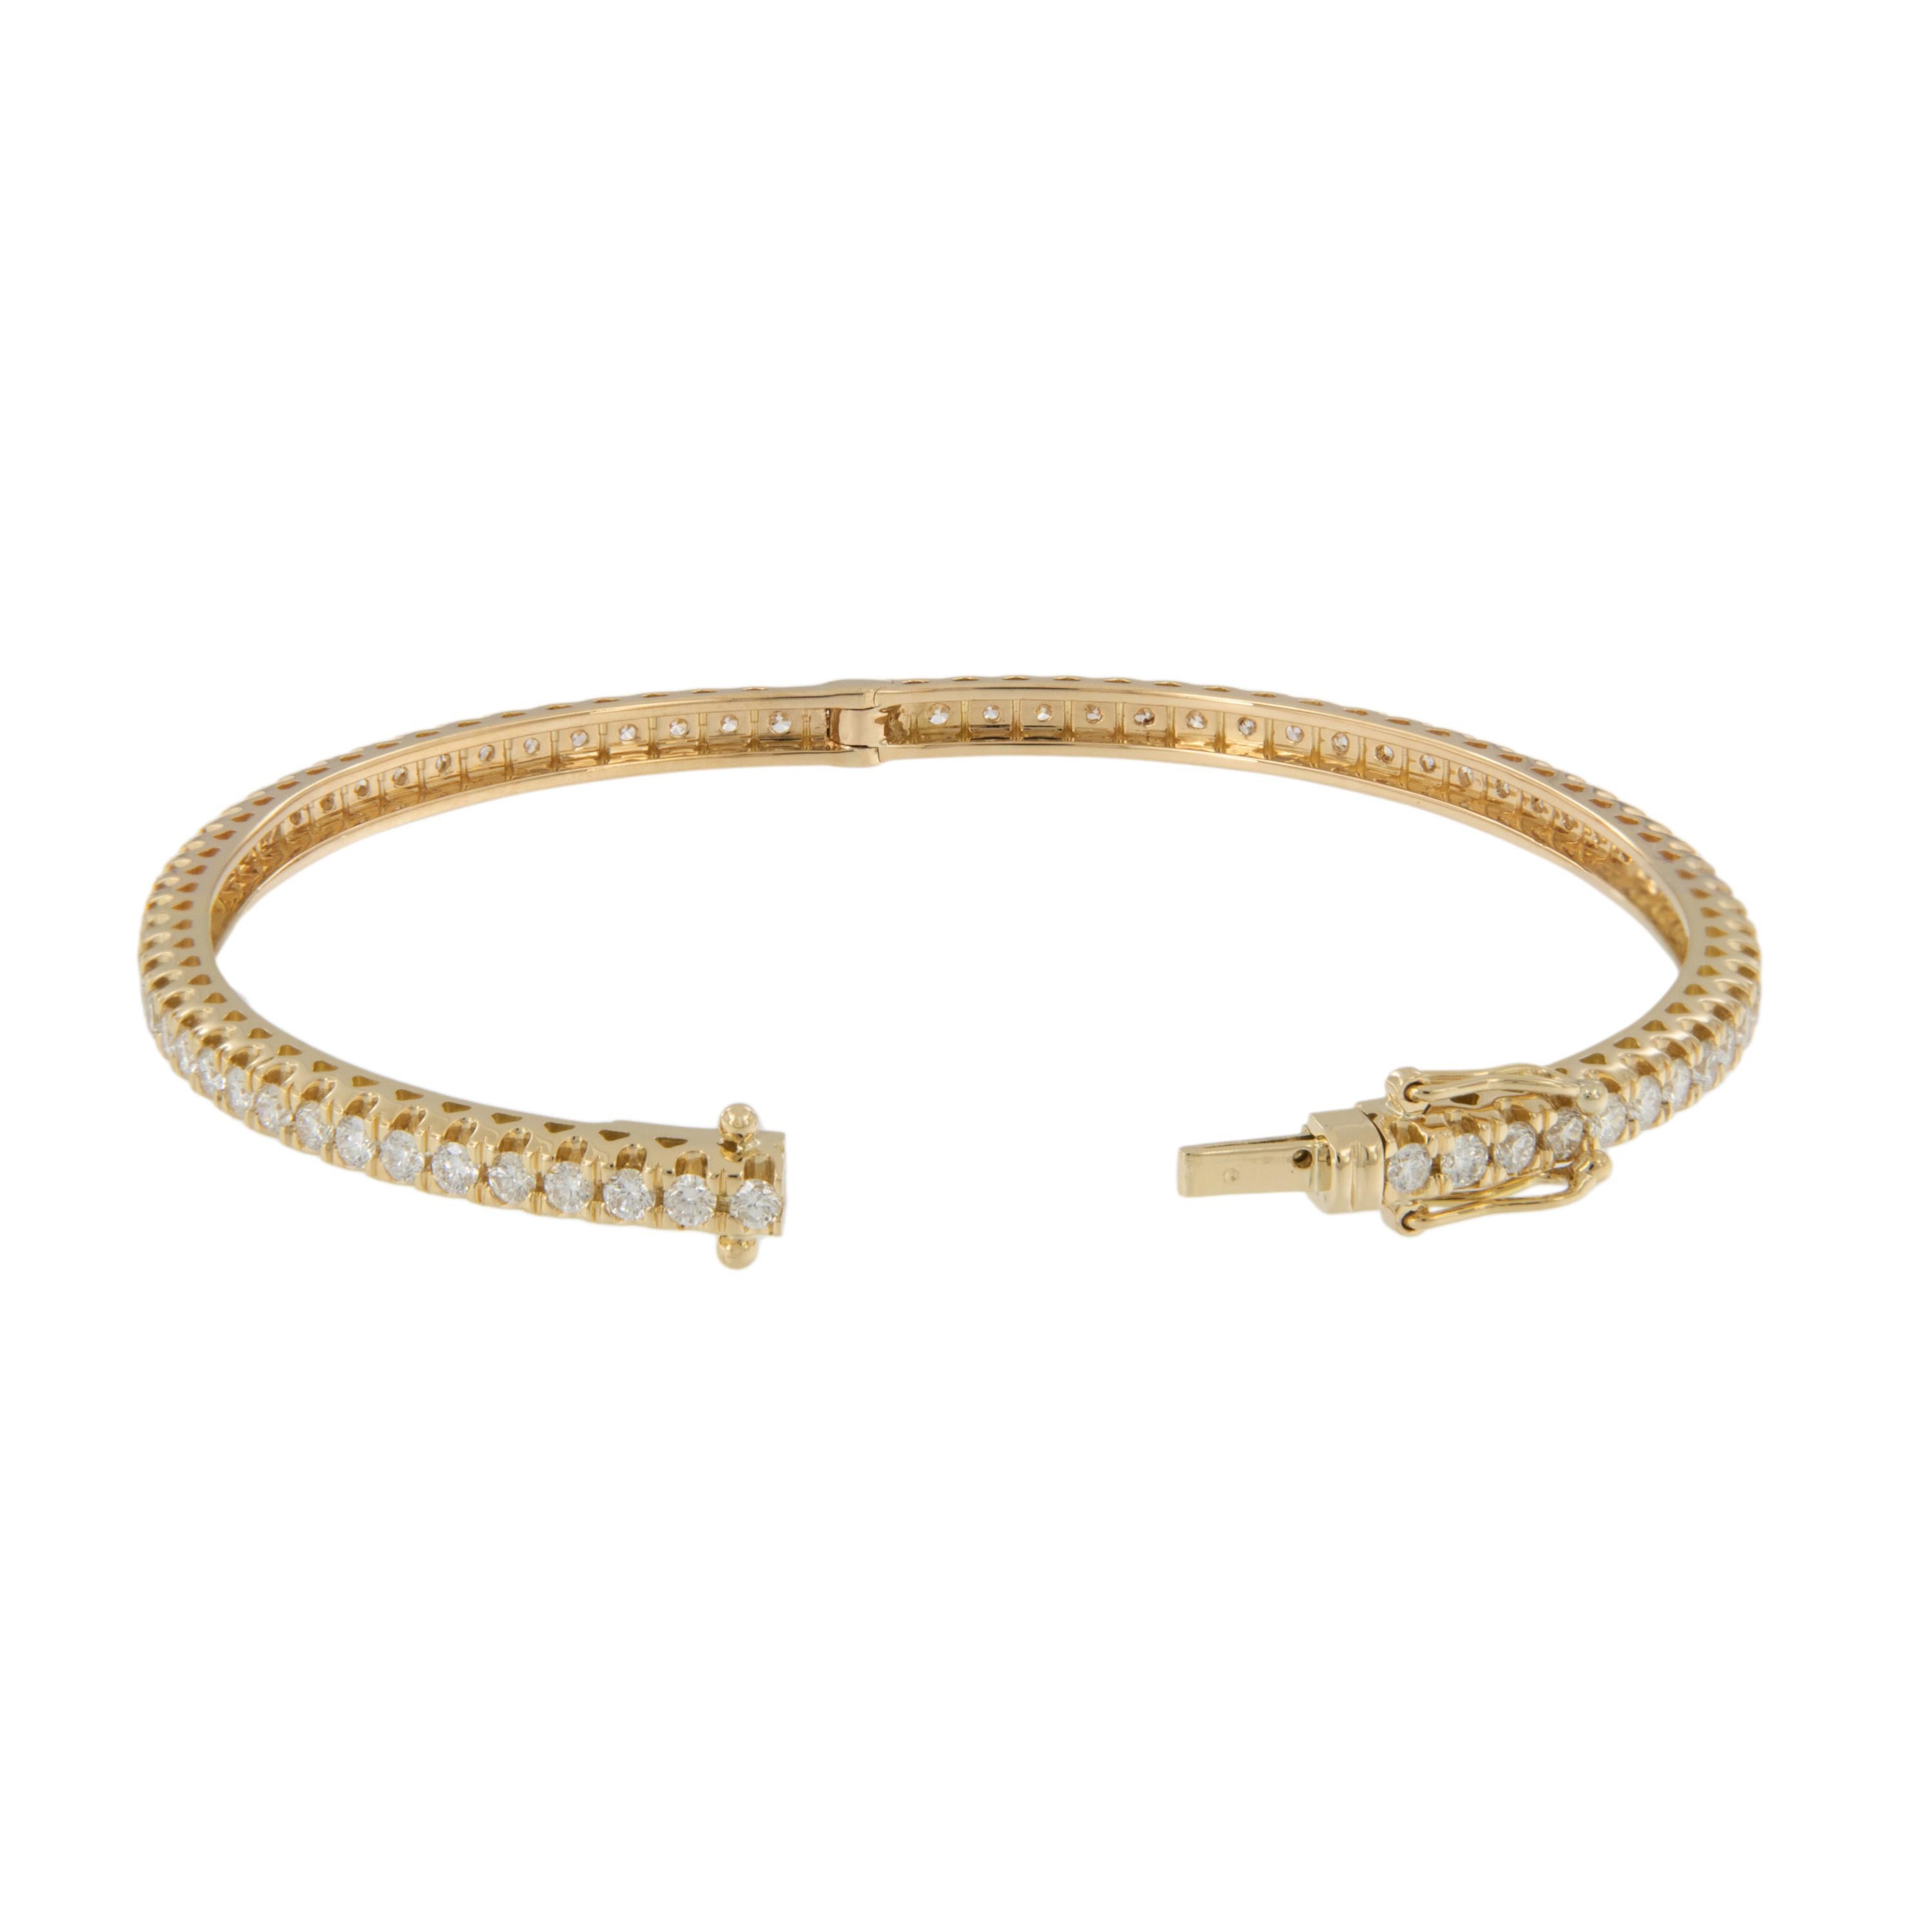 Round Cut 18 Karat Yellow Gold 3.15 Cttw Eternity Diamond Bangle Bracelet Made in Italy For Sale